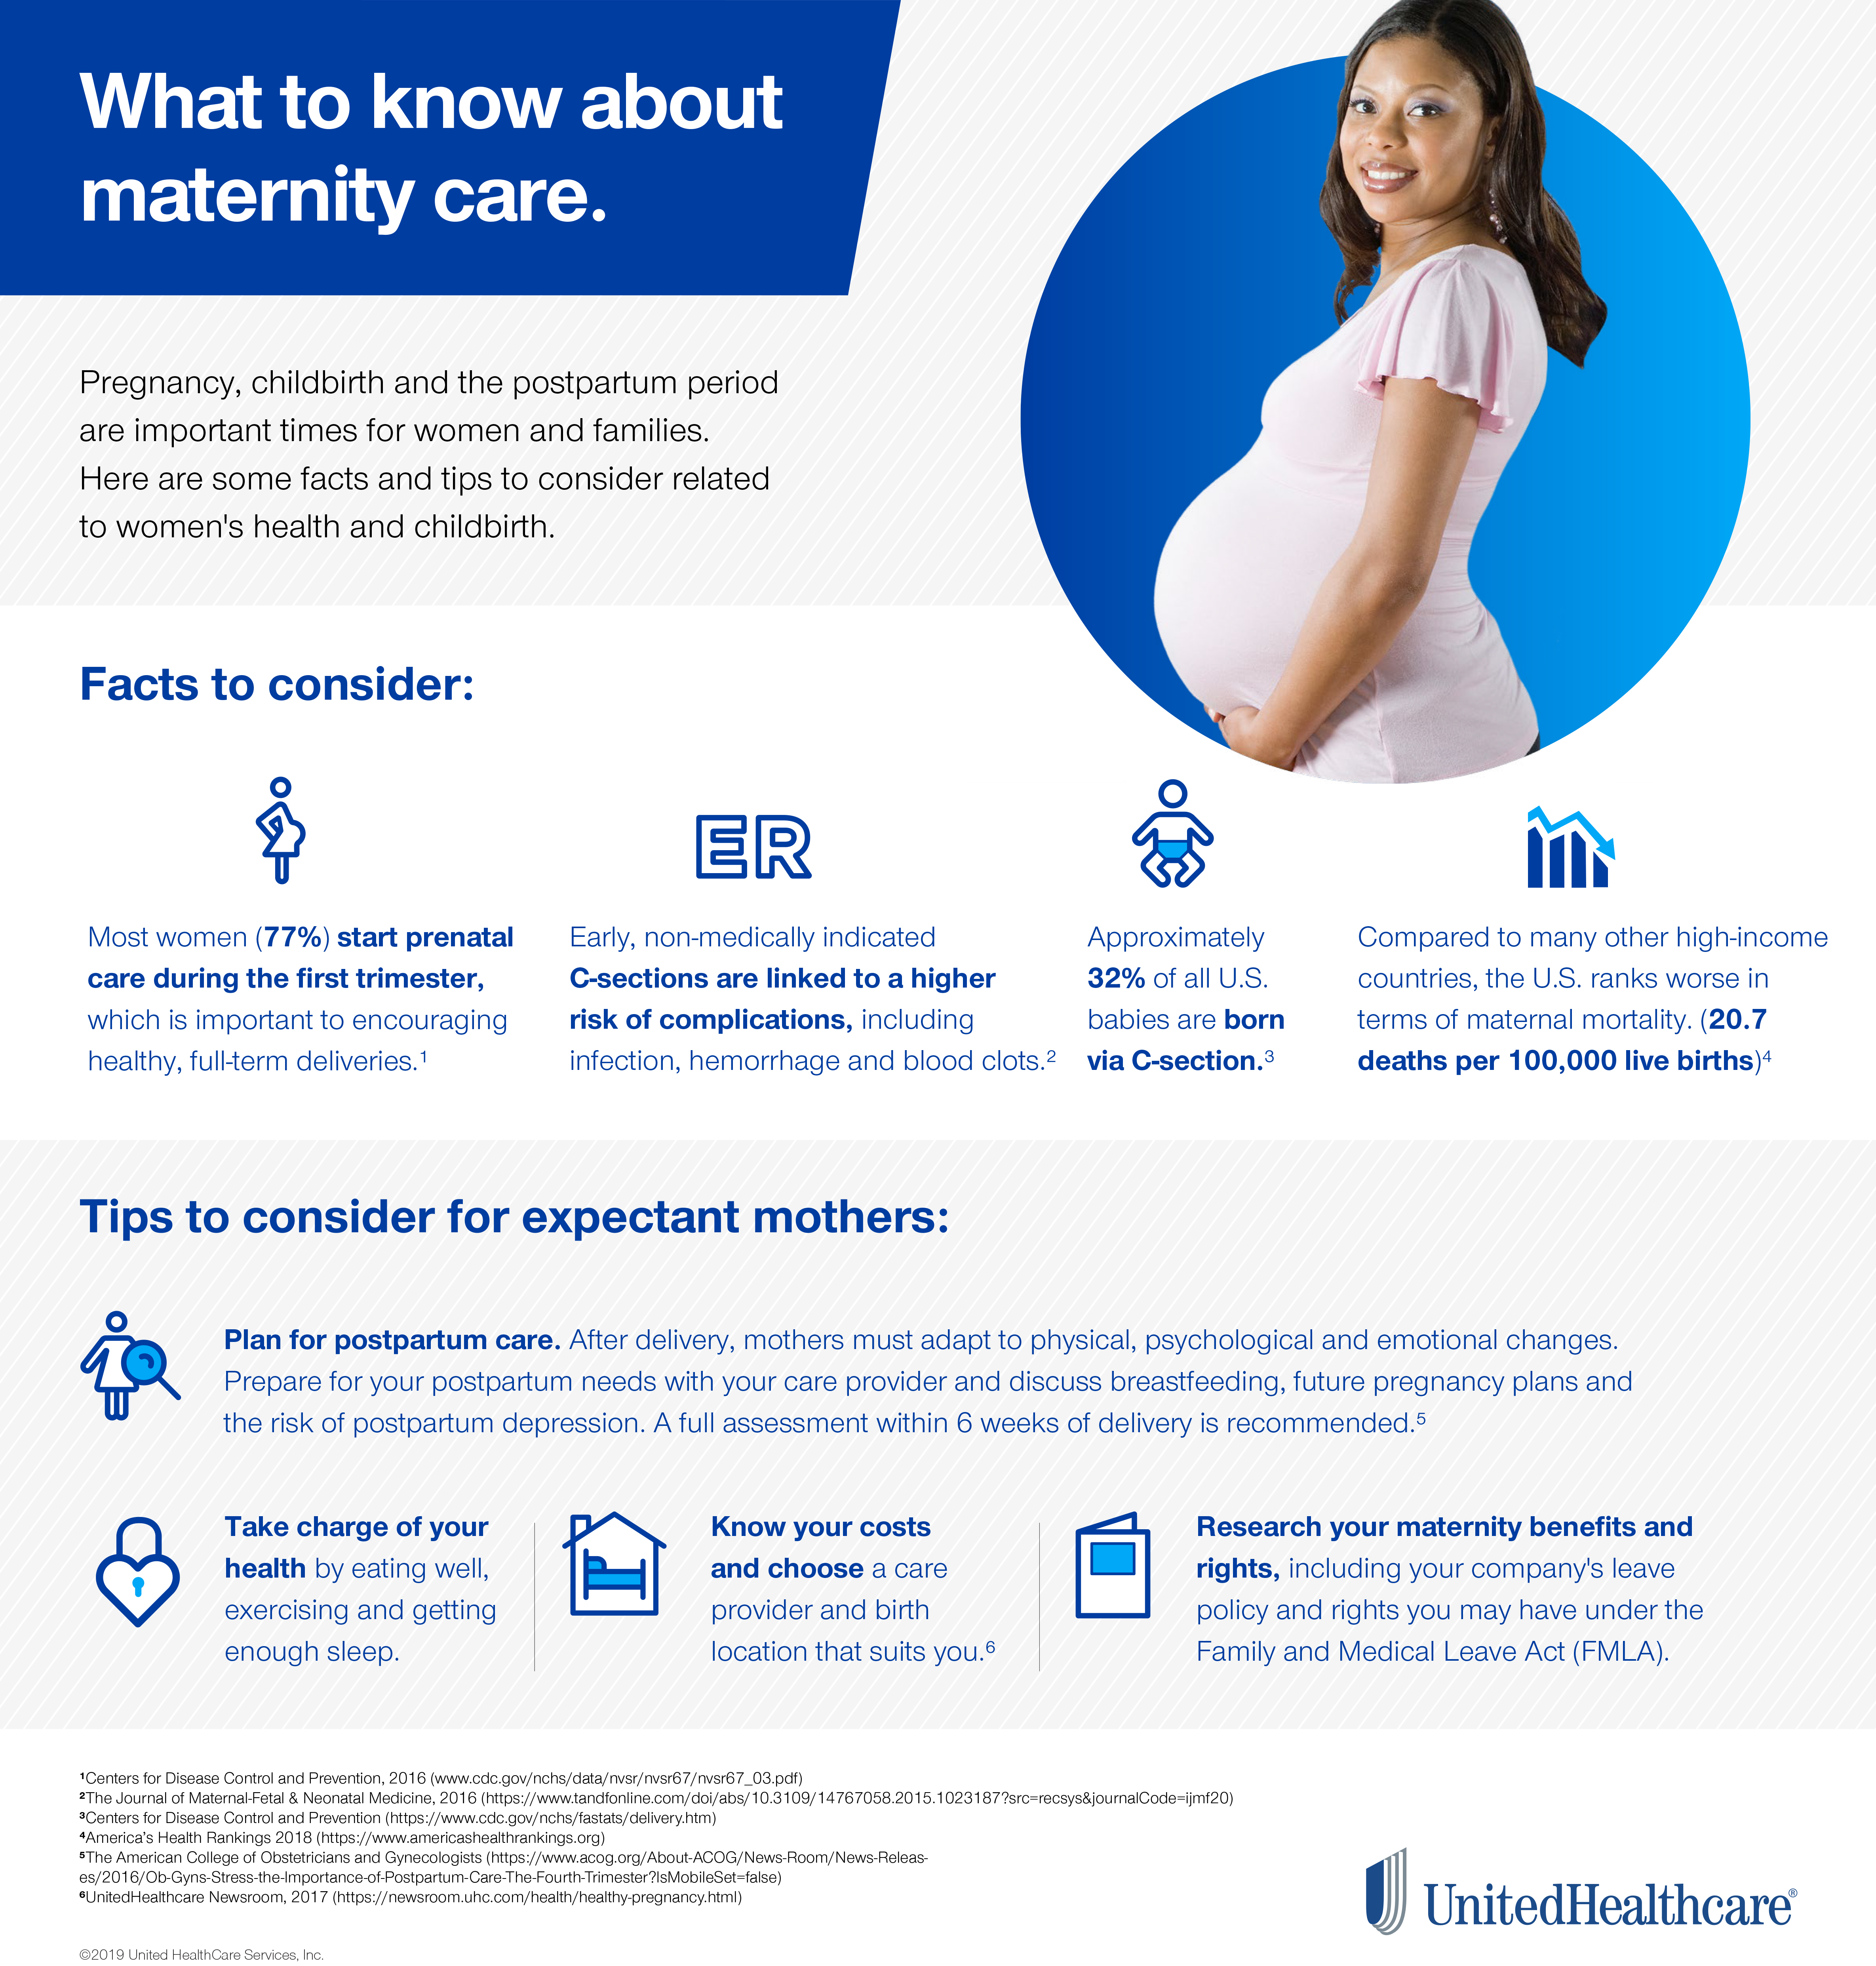 UnitedHealthcare Helps Support Moms' and Babies' Health Before and After  Delivery with New Bundled Payment Program for Maternity Care